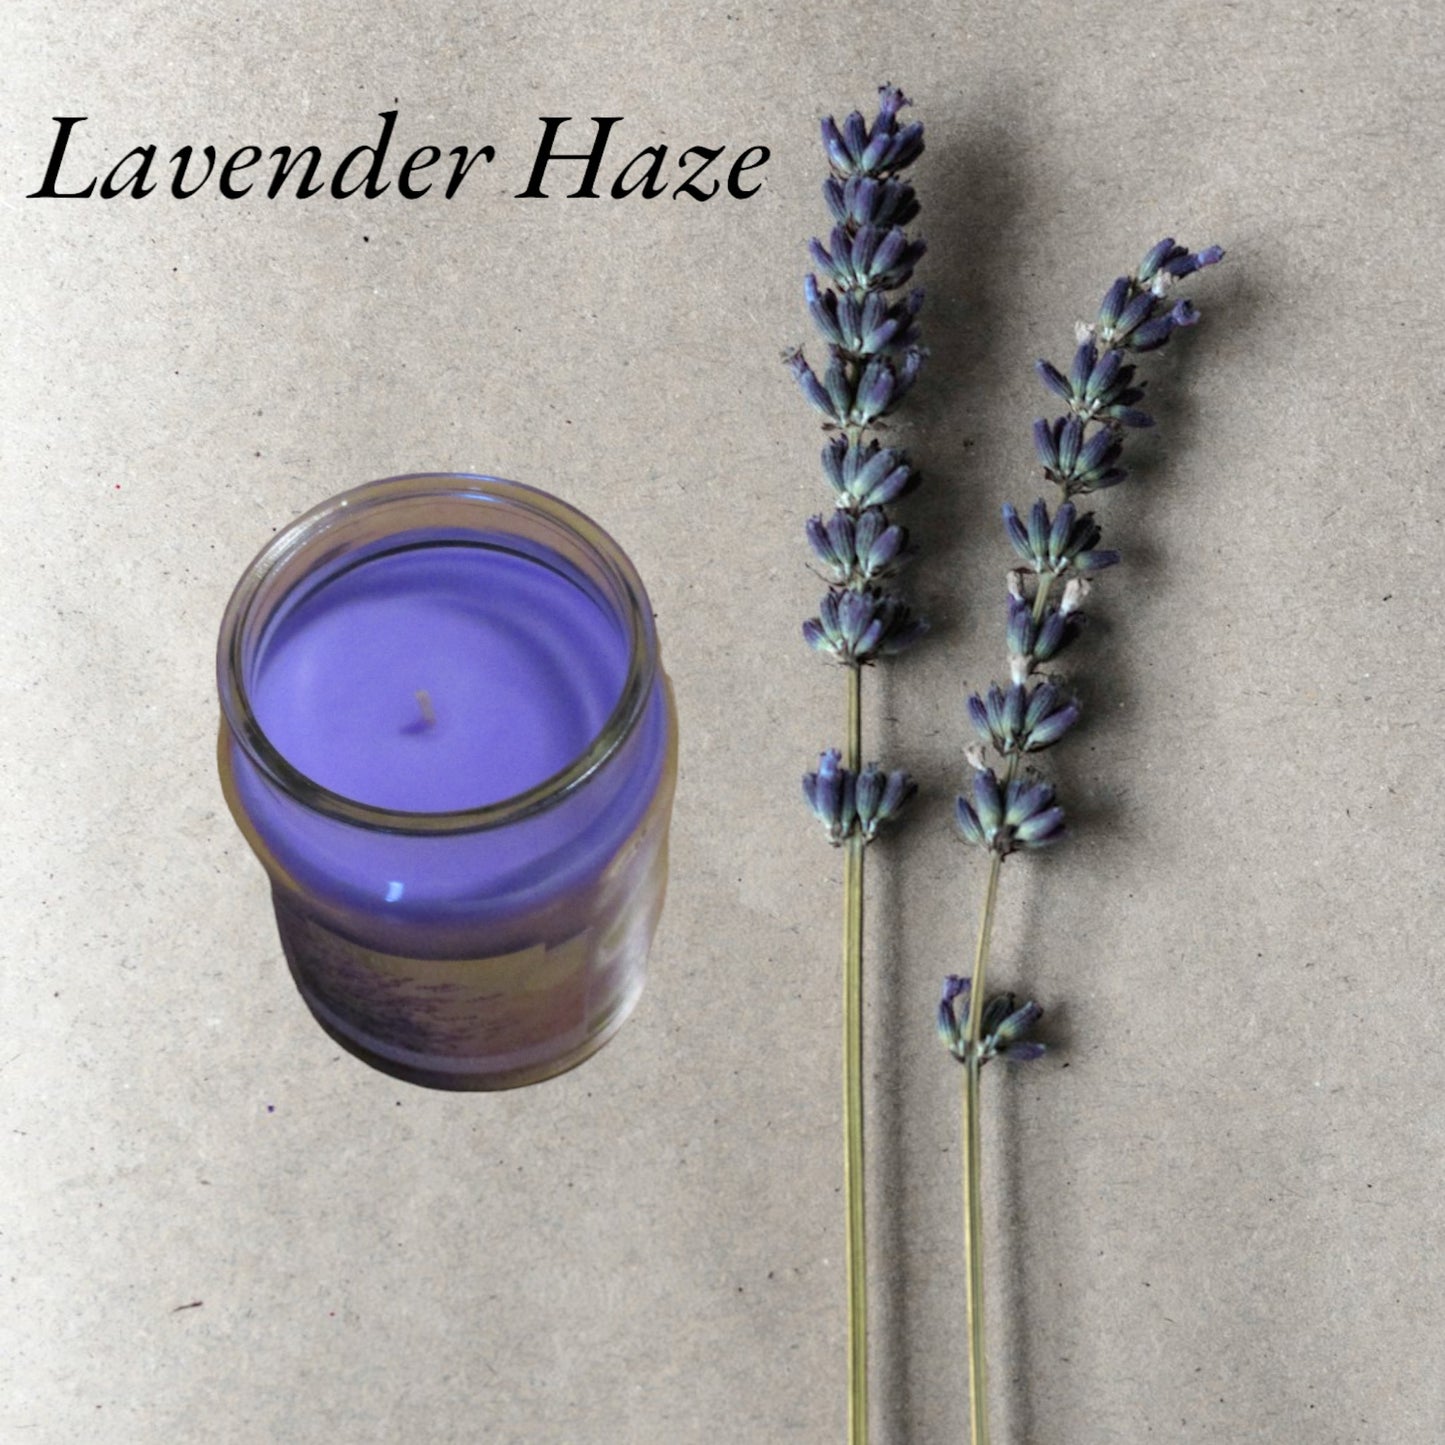 Luxury Scented Candle - (LAVENDER HAZE) - (By Wickford & Co)